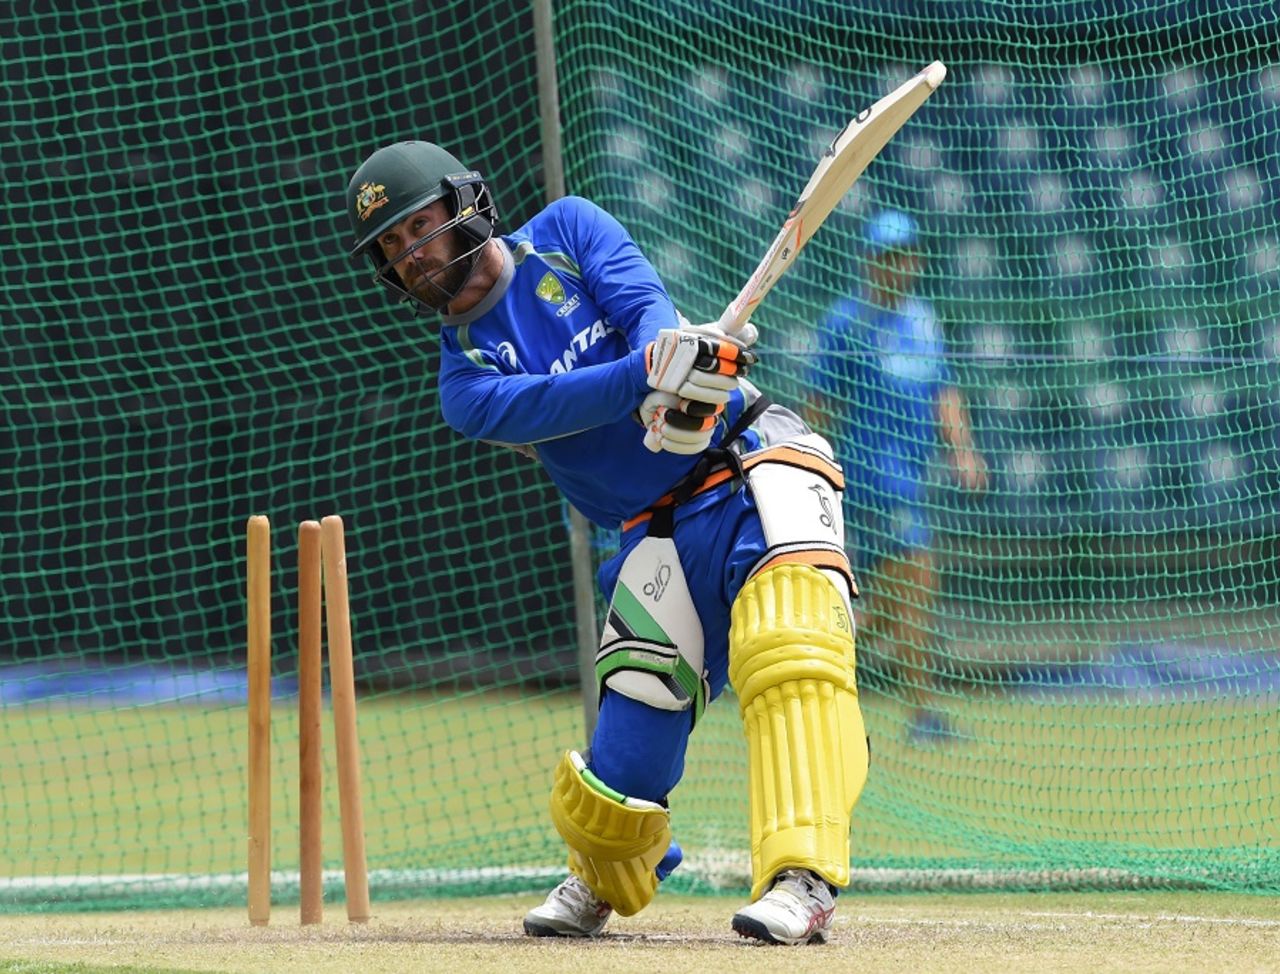 Glenn Maxwell tees off during a training session, Colombo, September 8, 2016